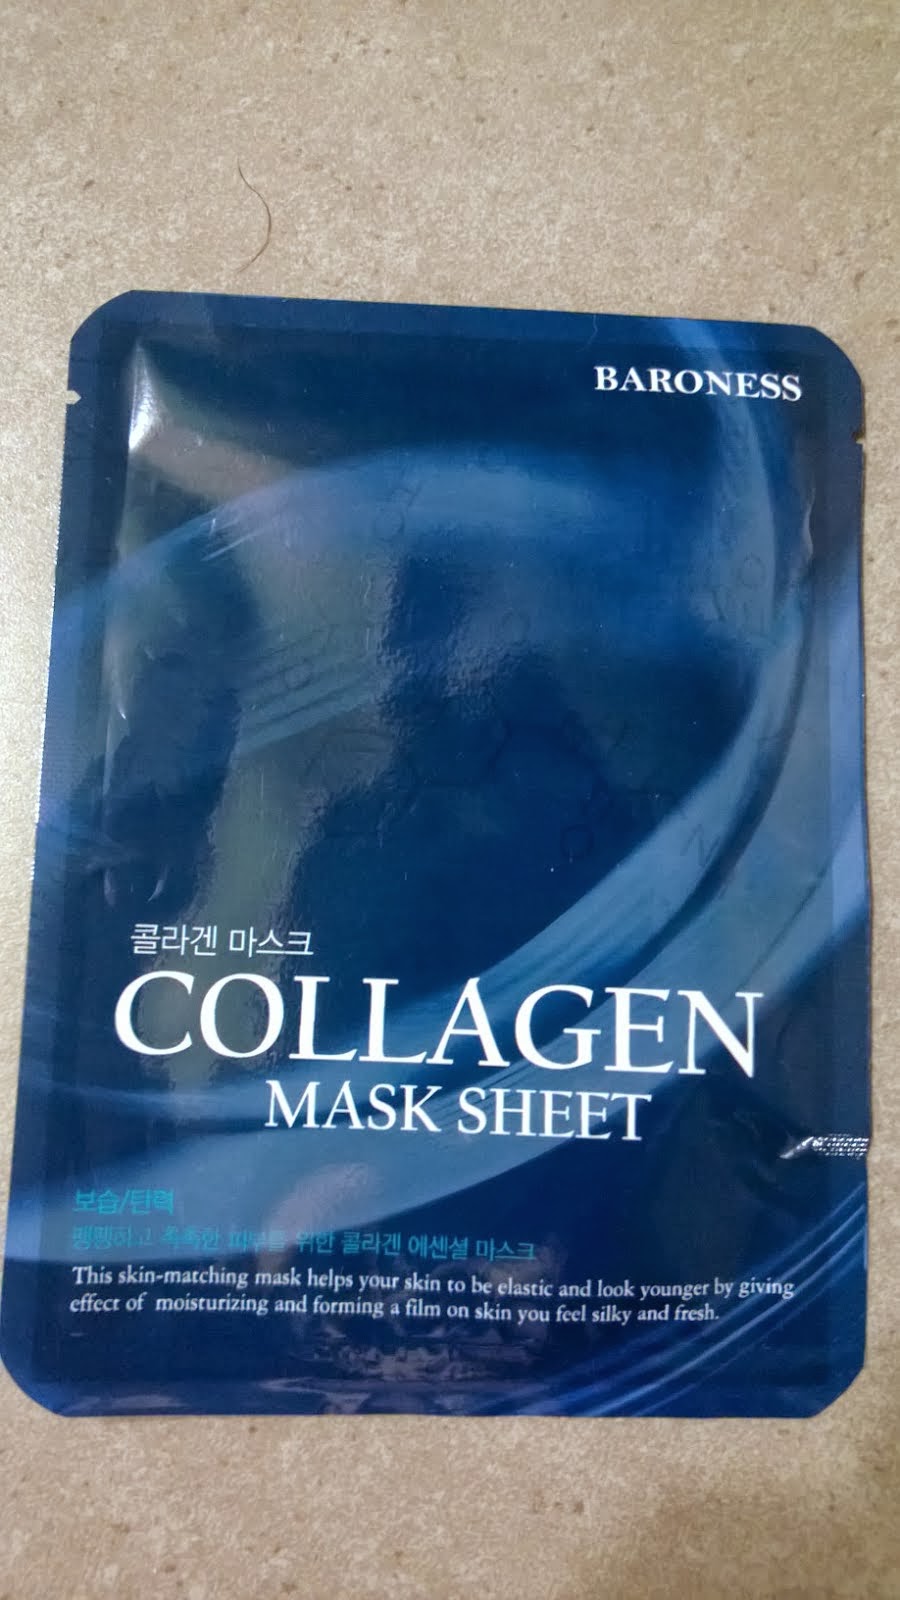 Skin Care Review: Baroness Collagen Mask Sheet